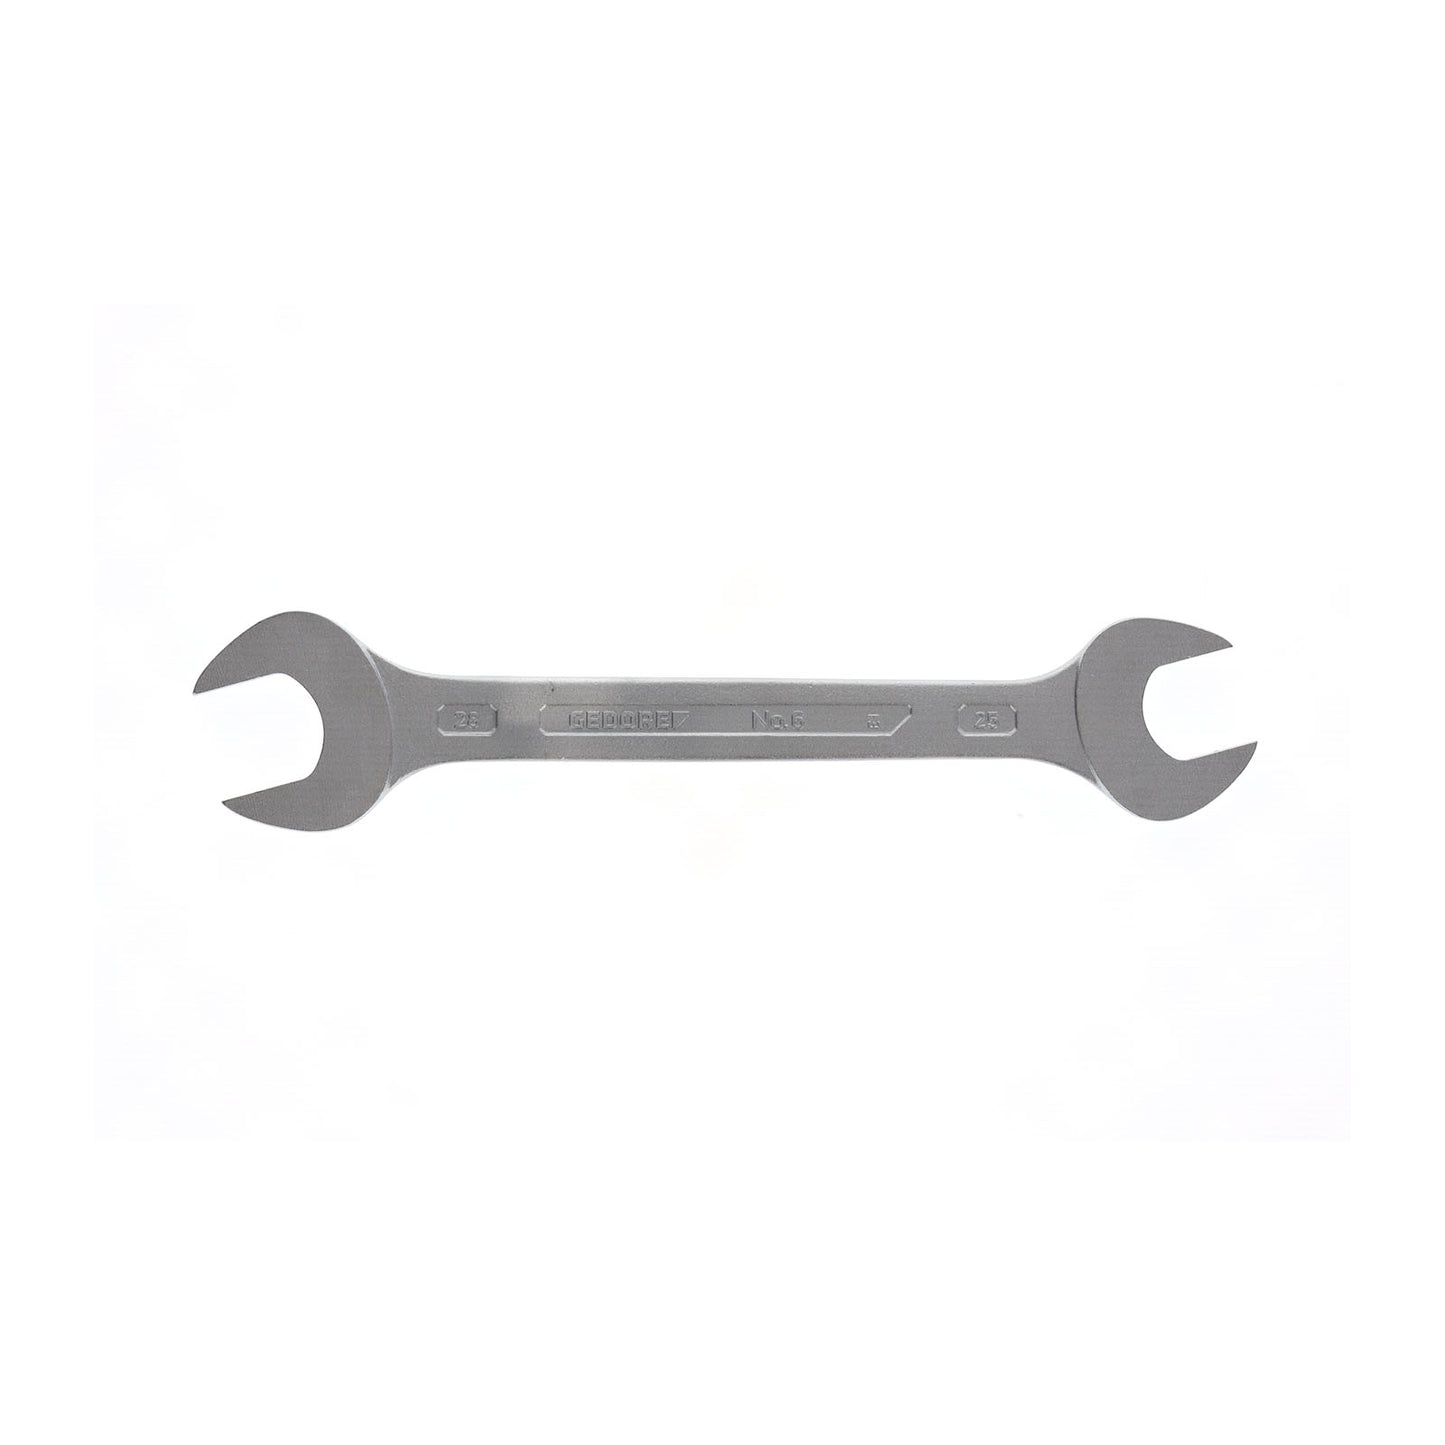 GEDORE 6 25X28 - 2-Mount Fixed Wrench, 25x28 (6067740)